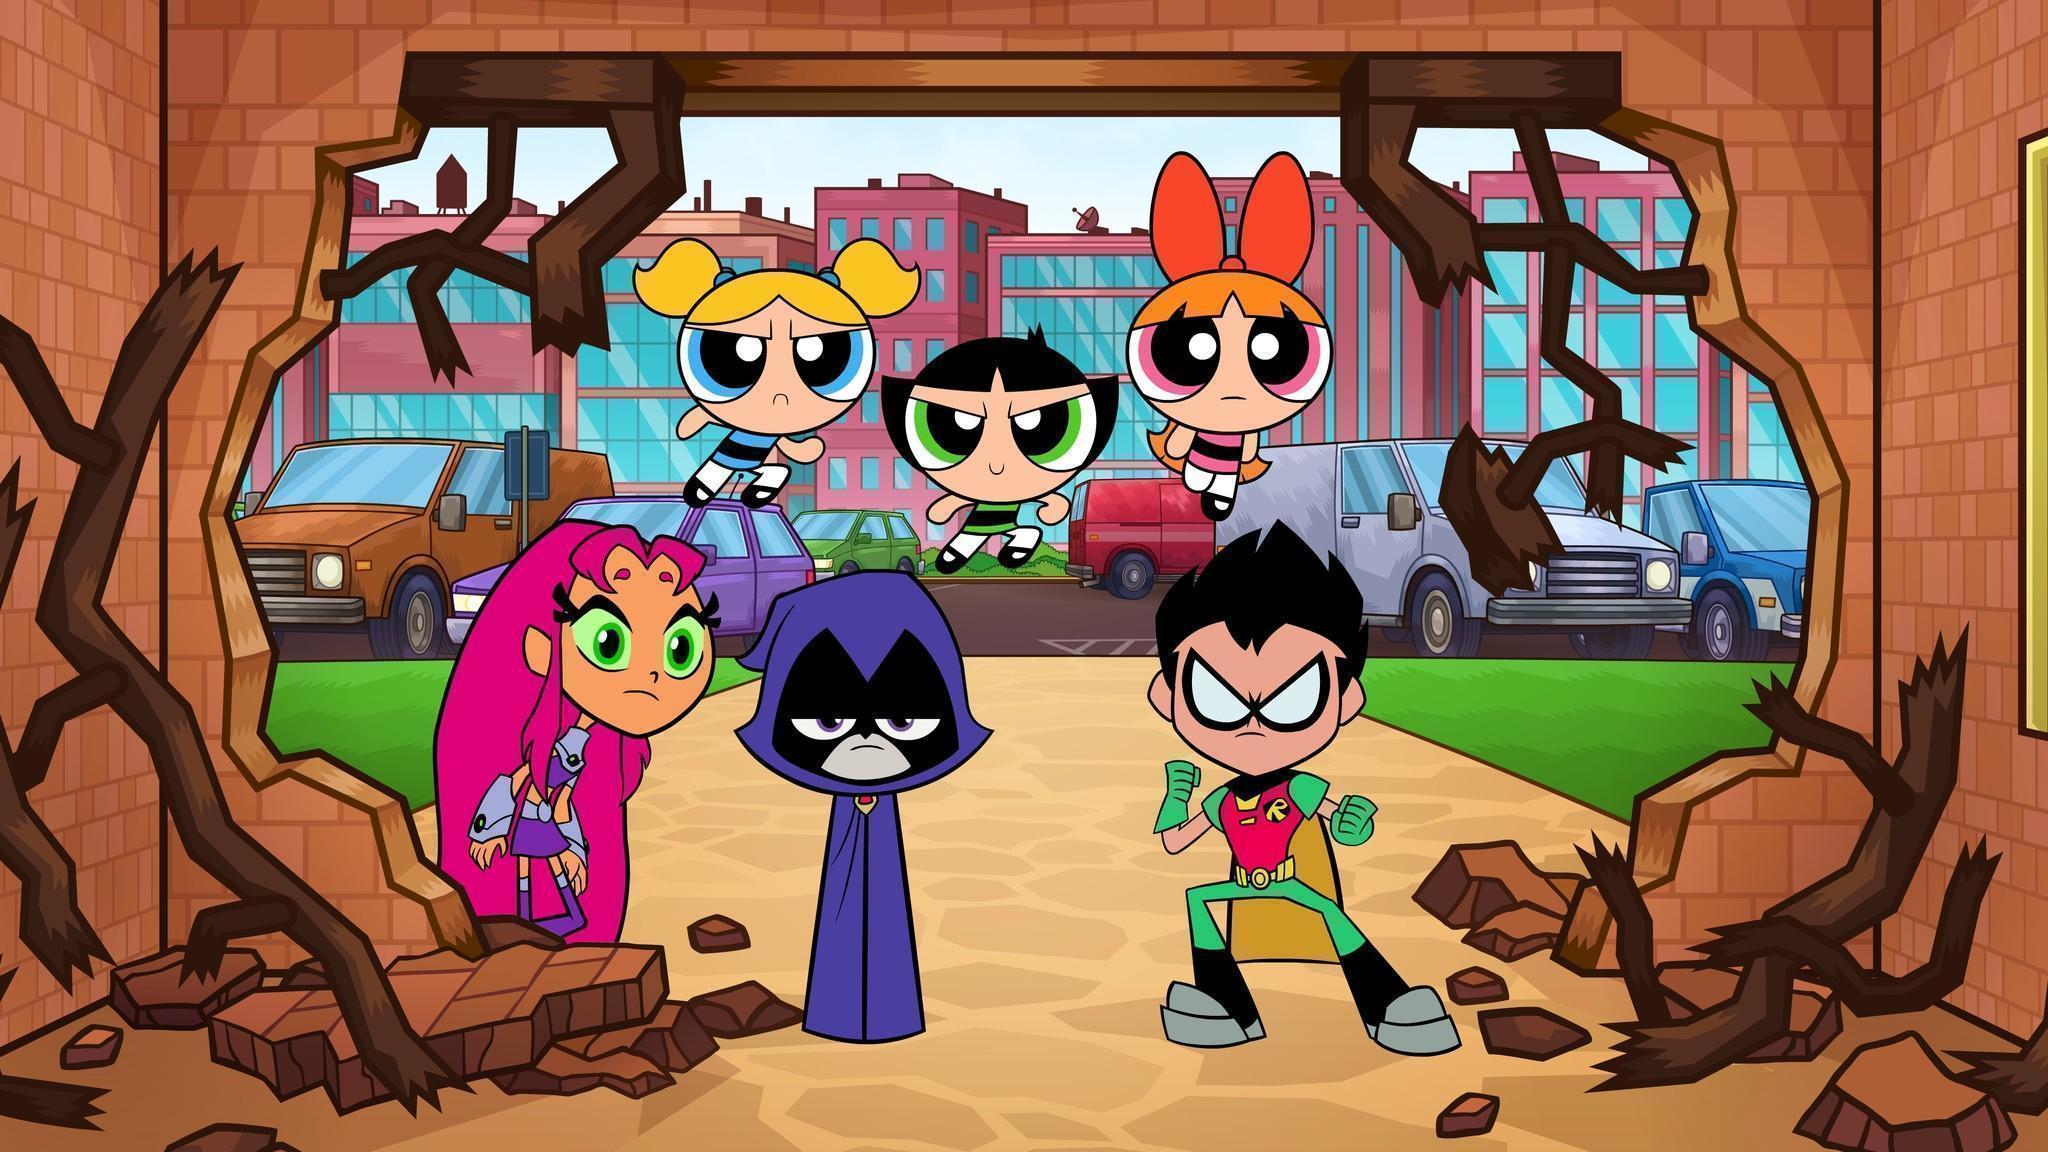 Brave The Overpowering Cuteness In This Glimpse Of The Teen Titans